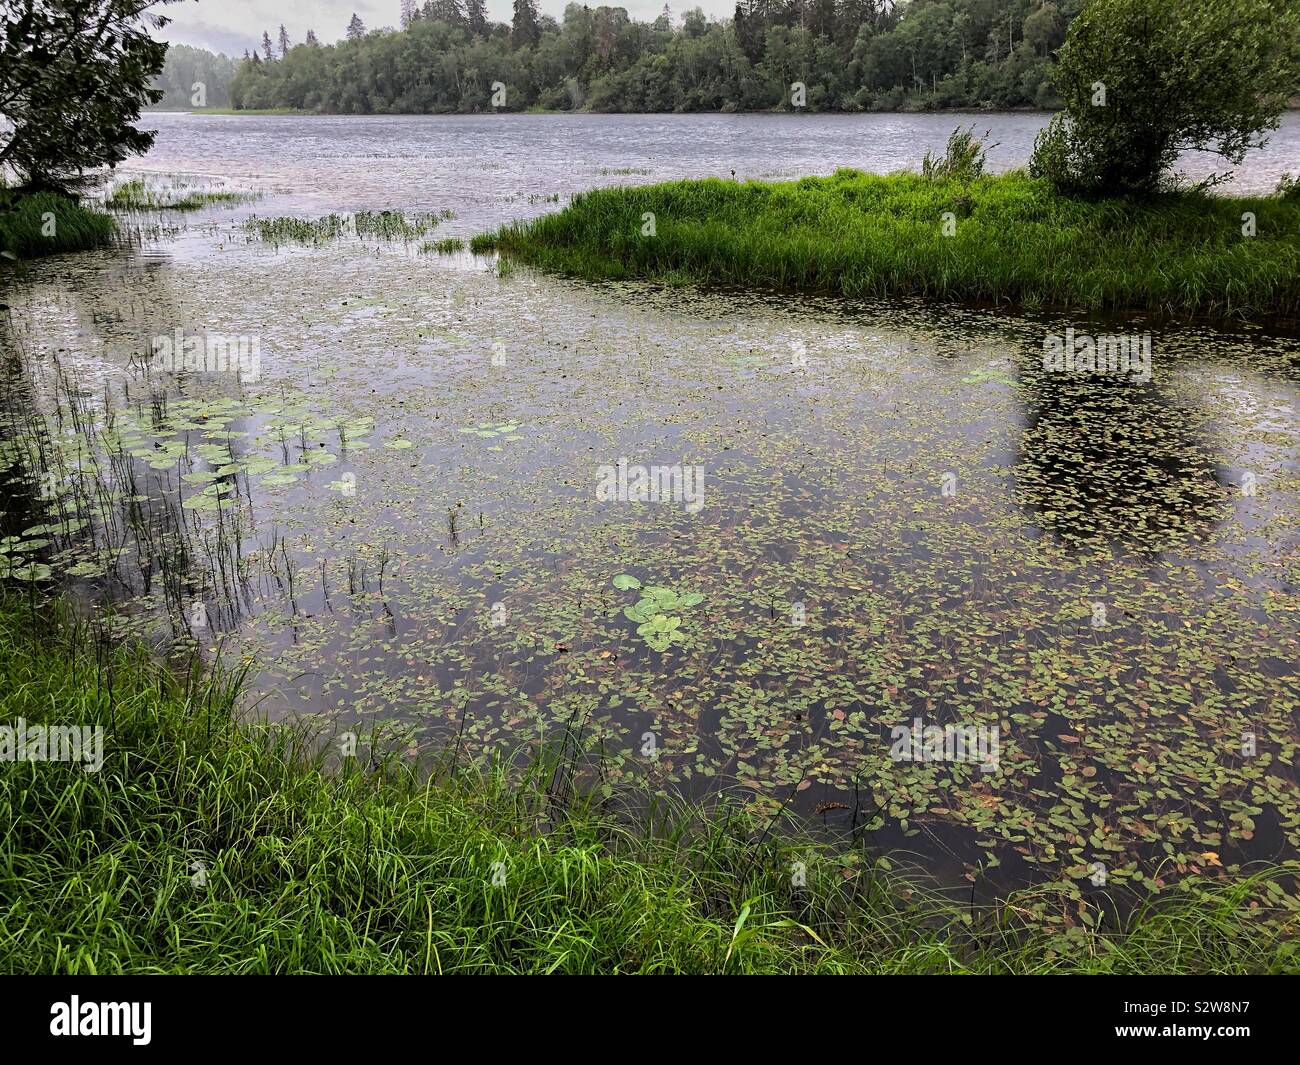 The river bank of Glomma In Akershus county, Norway, on a wet and rainy August day. Stock Photo